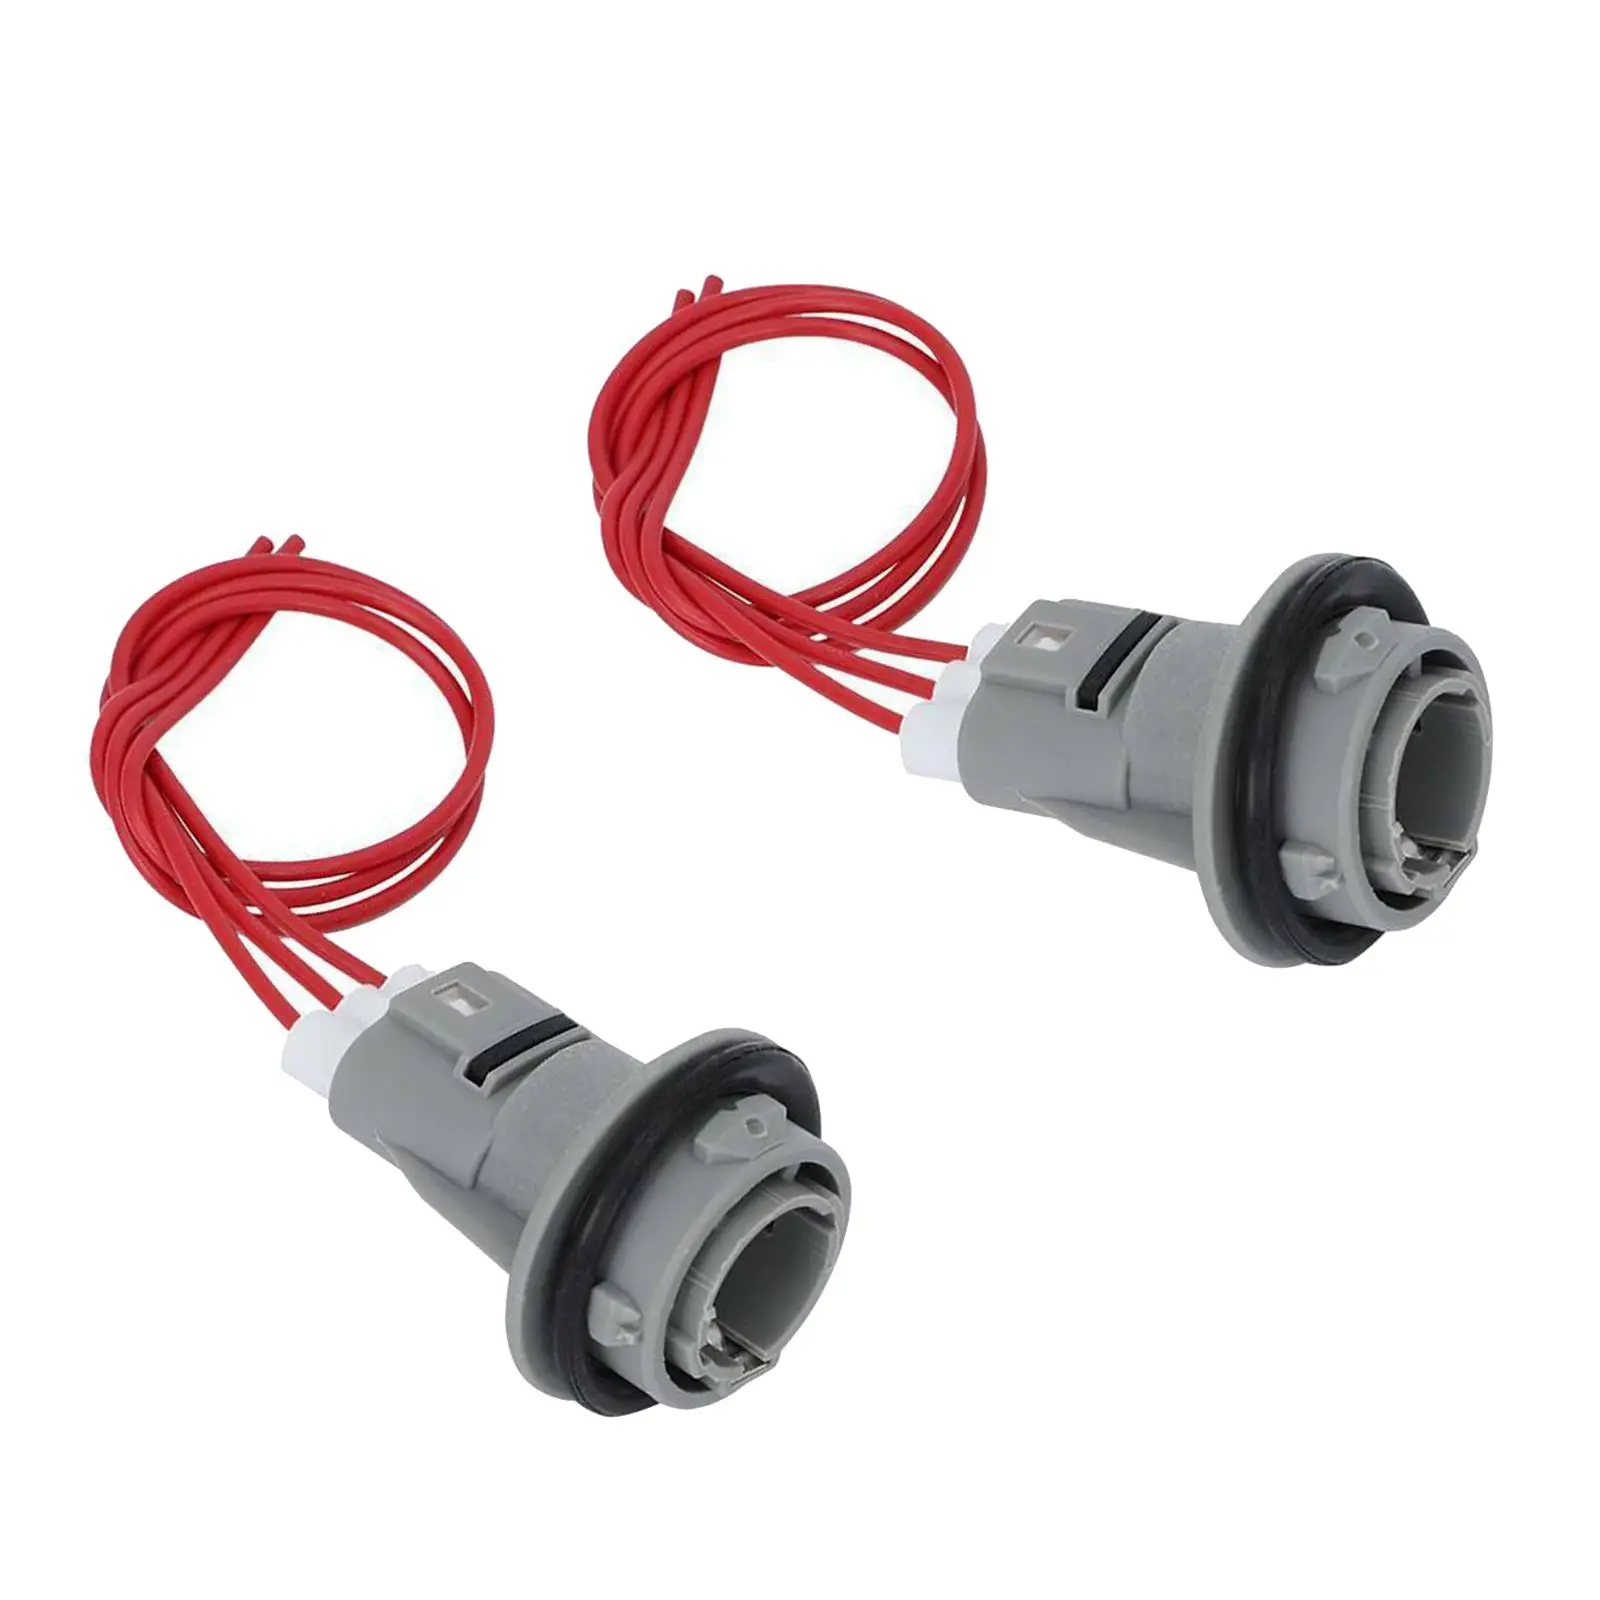 1 Pair Front Turn Signal Blinker Light Bulb Socket & Connector Harness 33302-Sr3-A01 for Accord